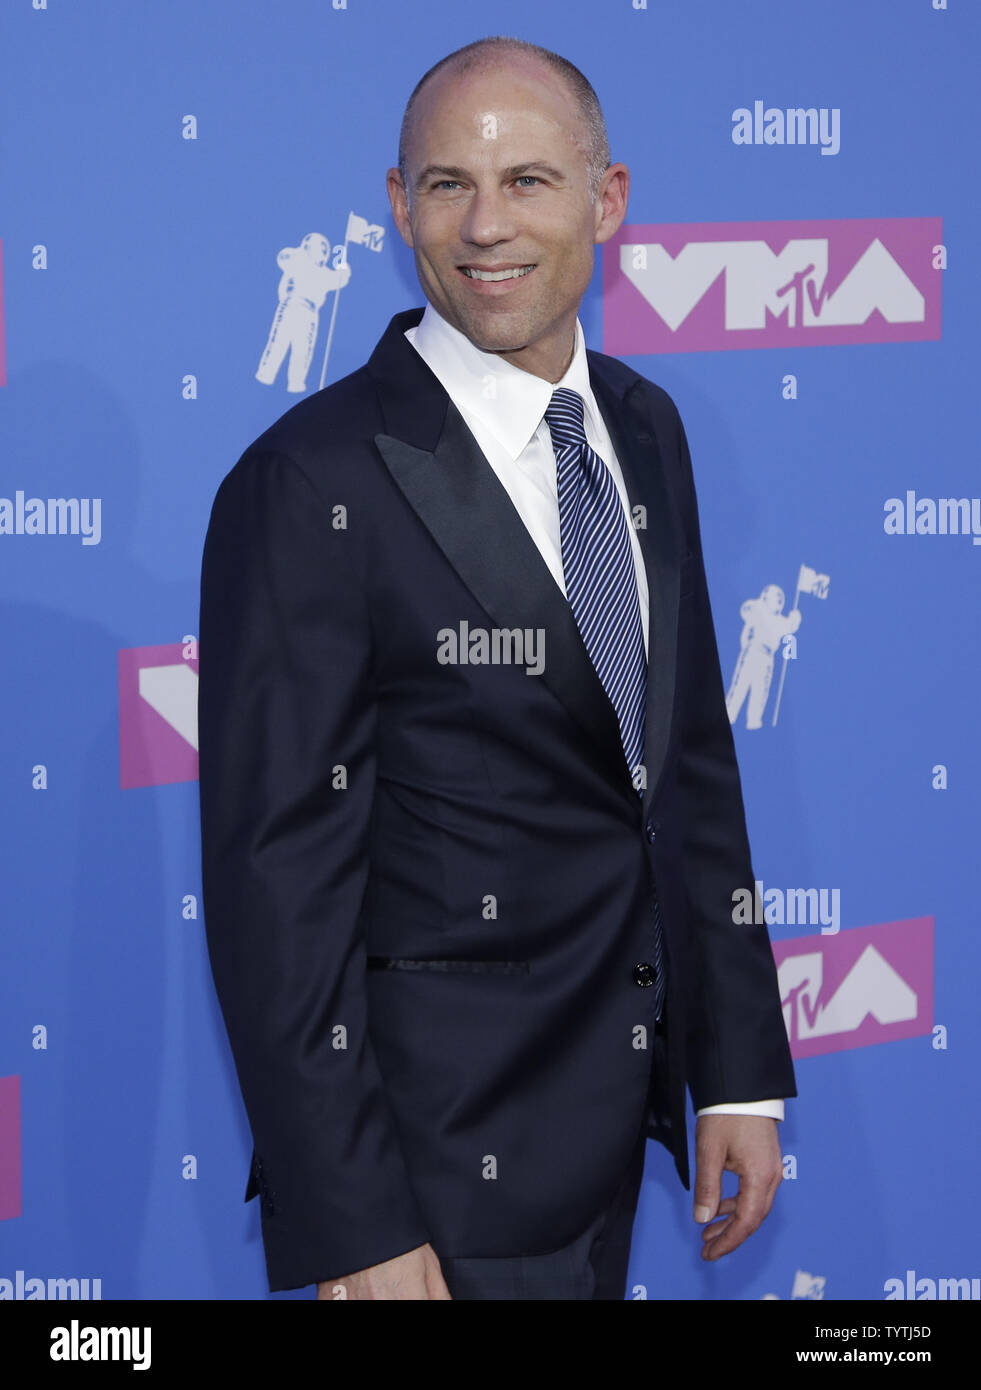 Michael Avenatti arrives on the red carpet at the 35th annual MTV Video Music Awards at Radio City Music Hall in New York City on August 20, 2018.    Photo by Serena Xu-Ning/UPI Stock Photo